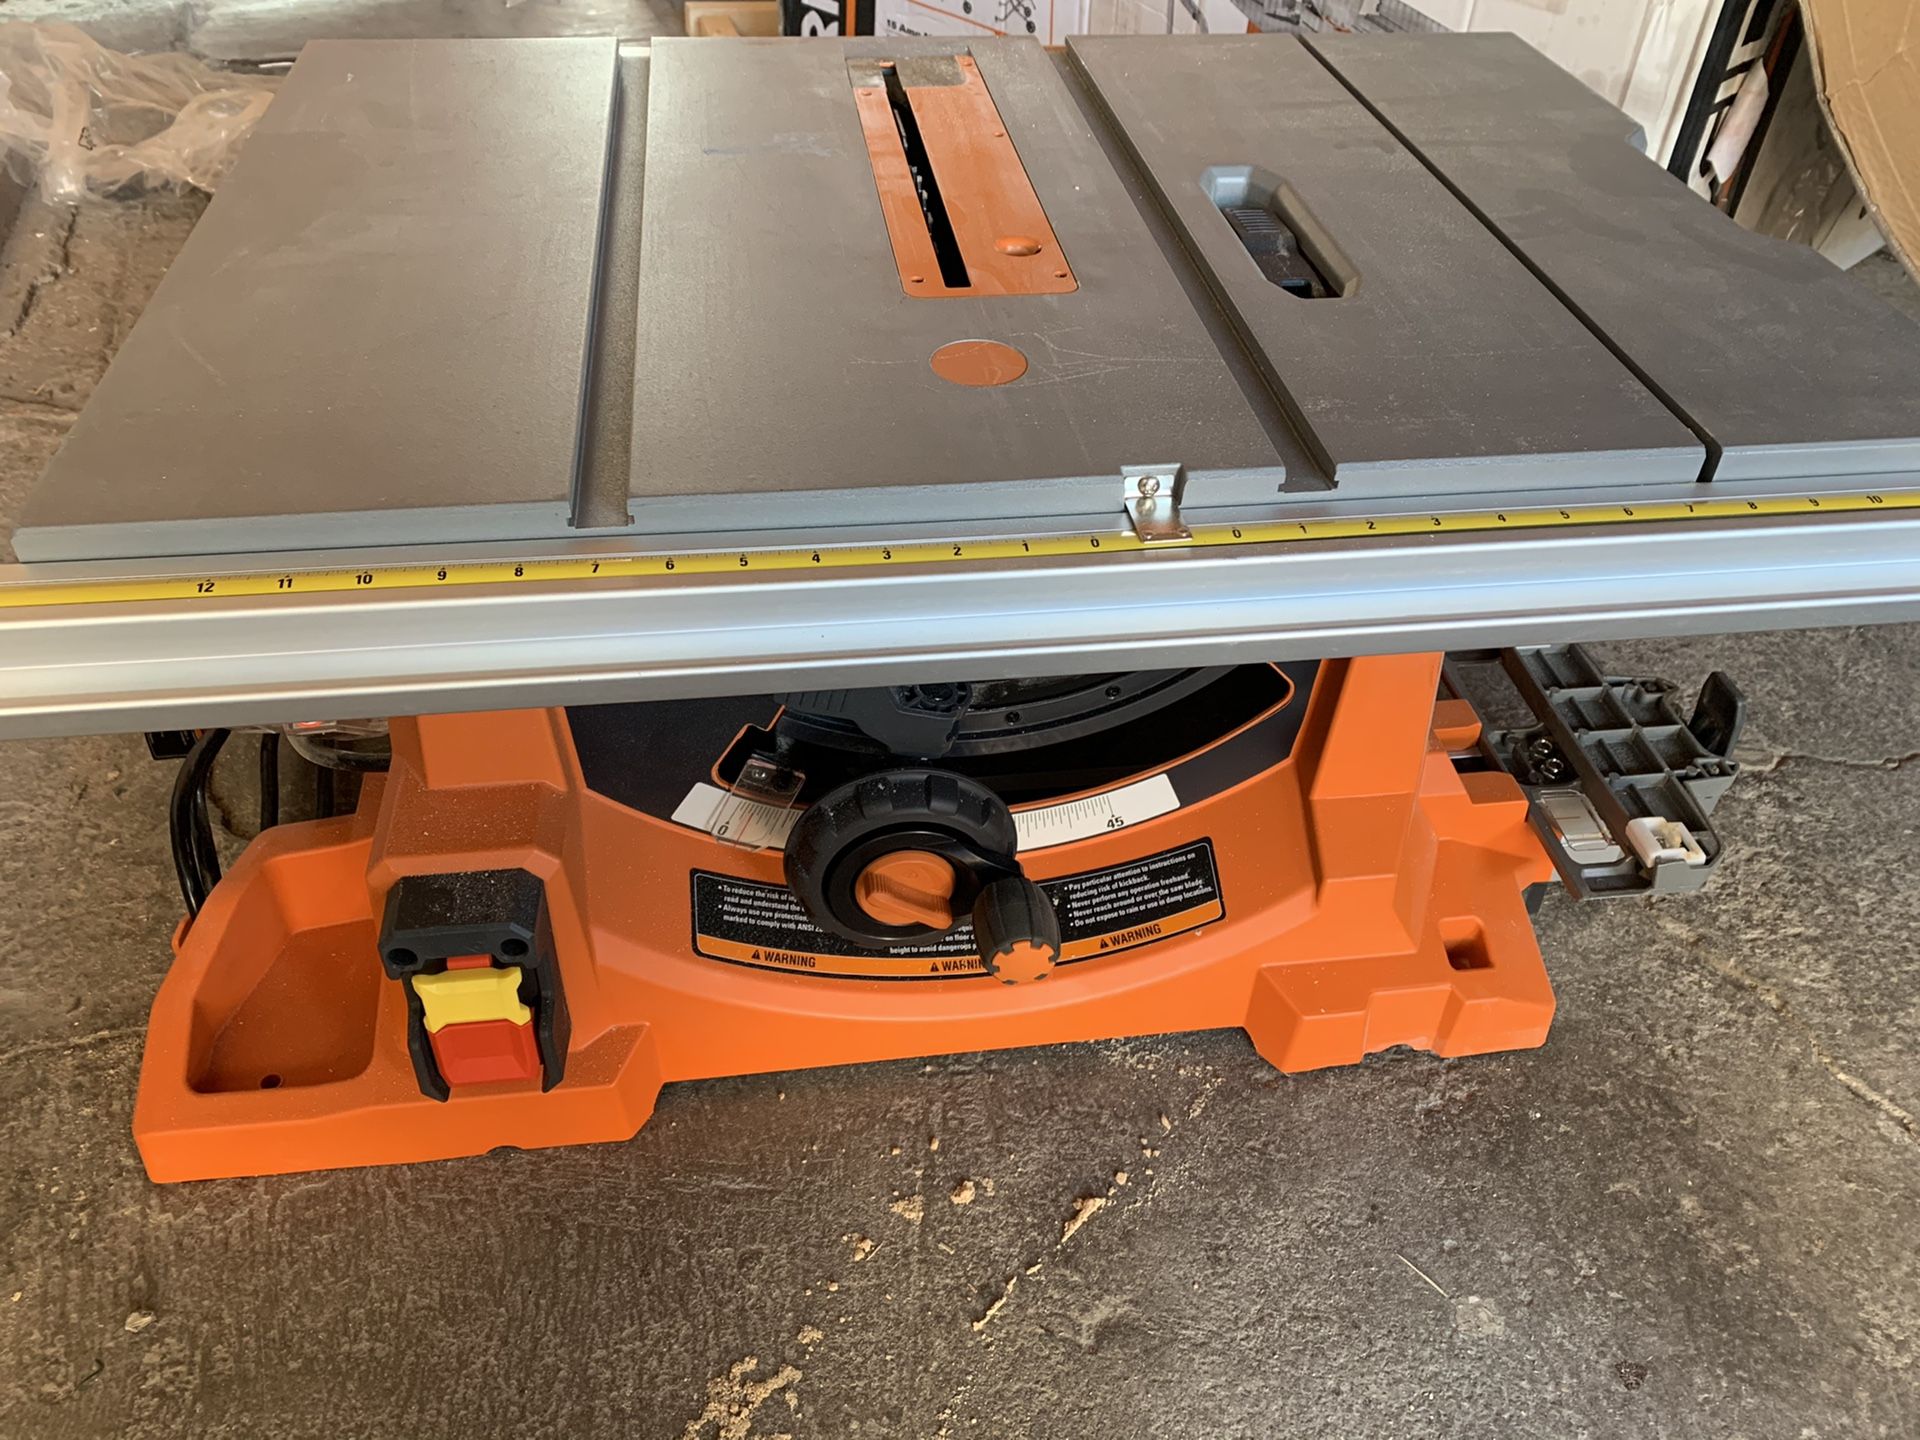 Rigid table saw with stand